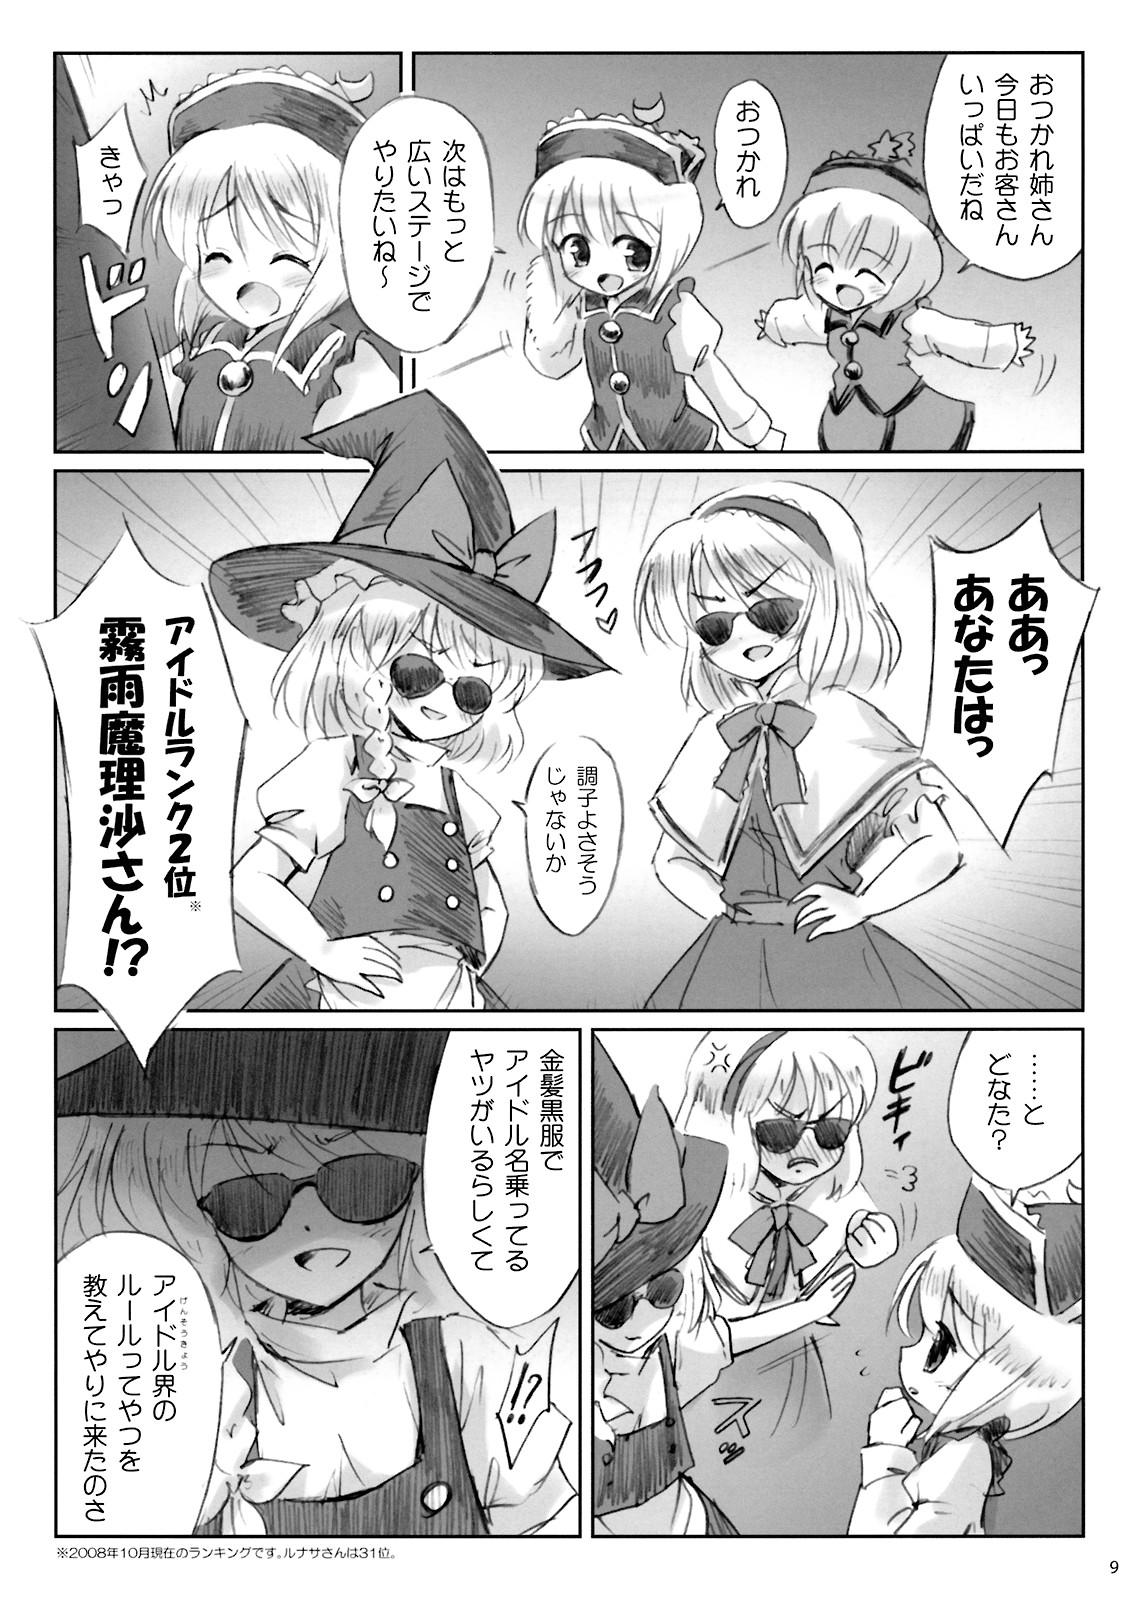 Tan IDOLMASTER - Touhou project Exhibitionist - Page 8